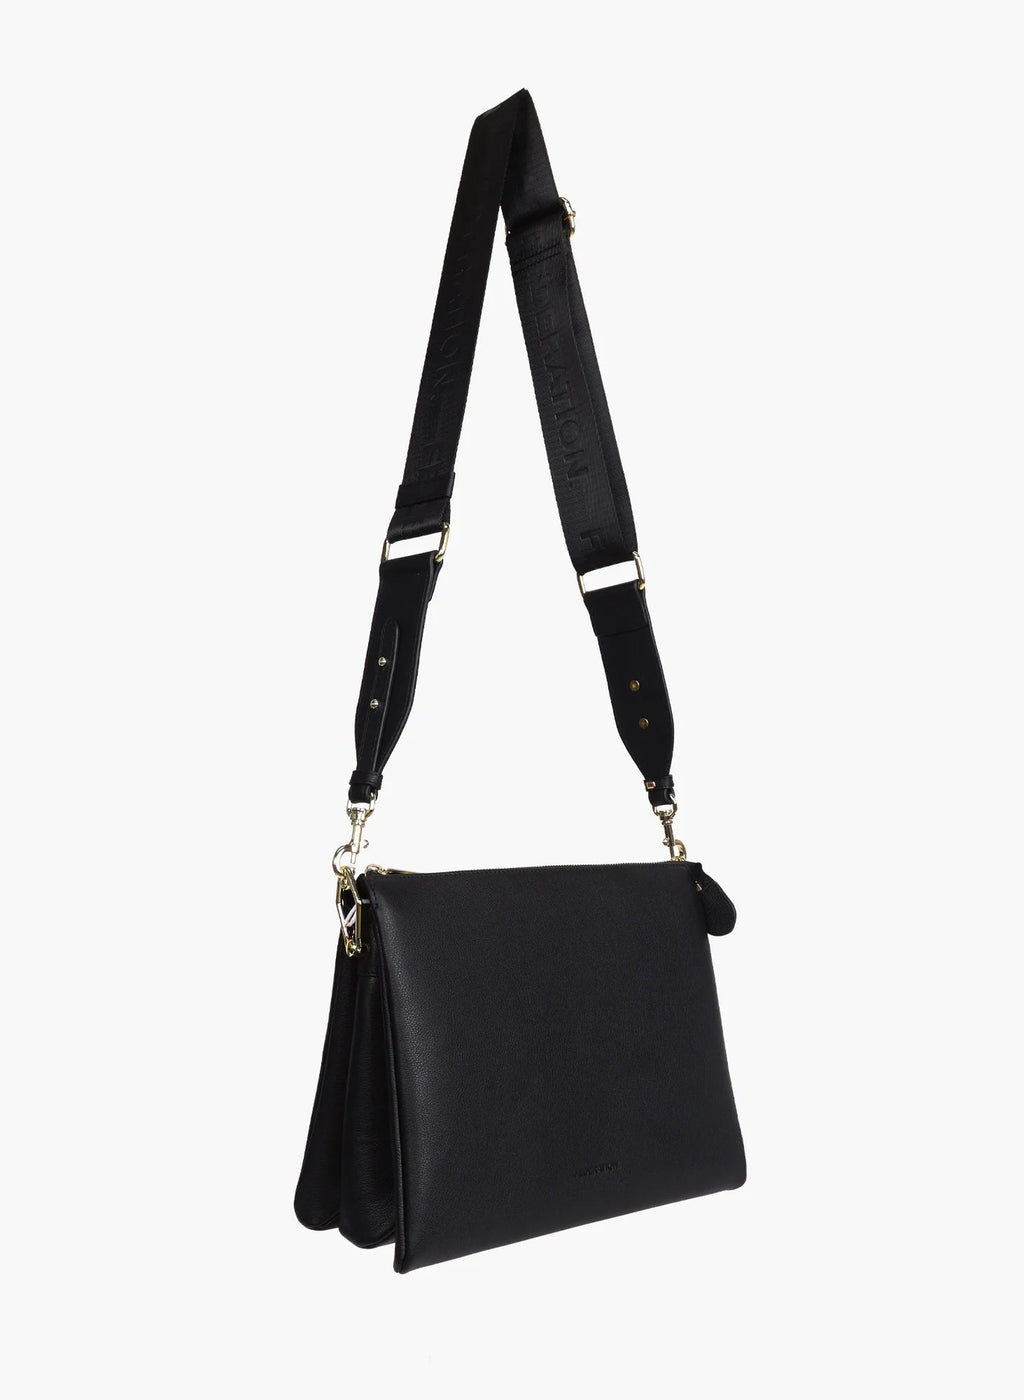 Large Compartments Bag - Black / Leather